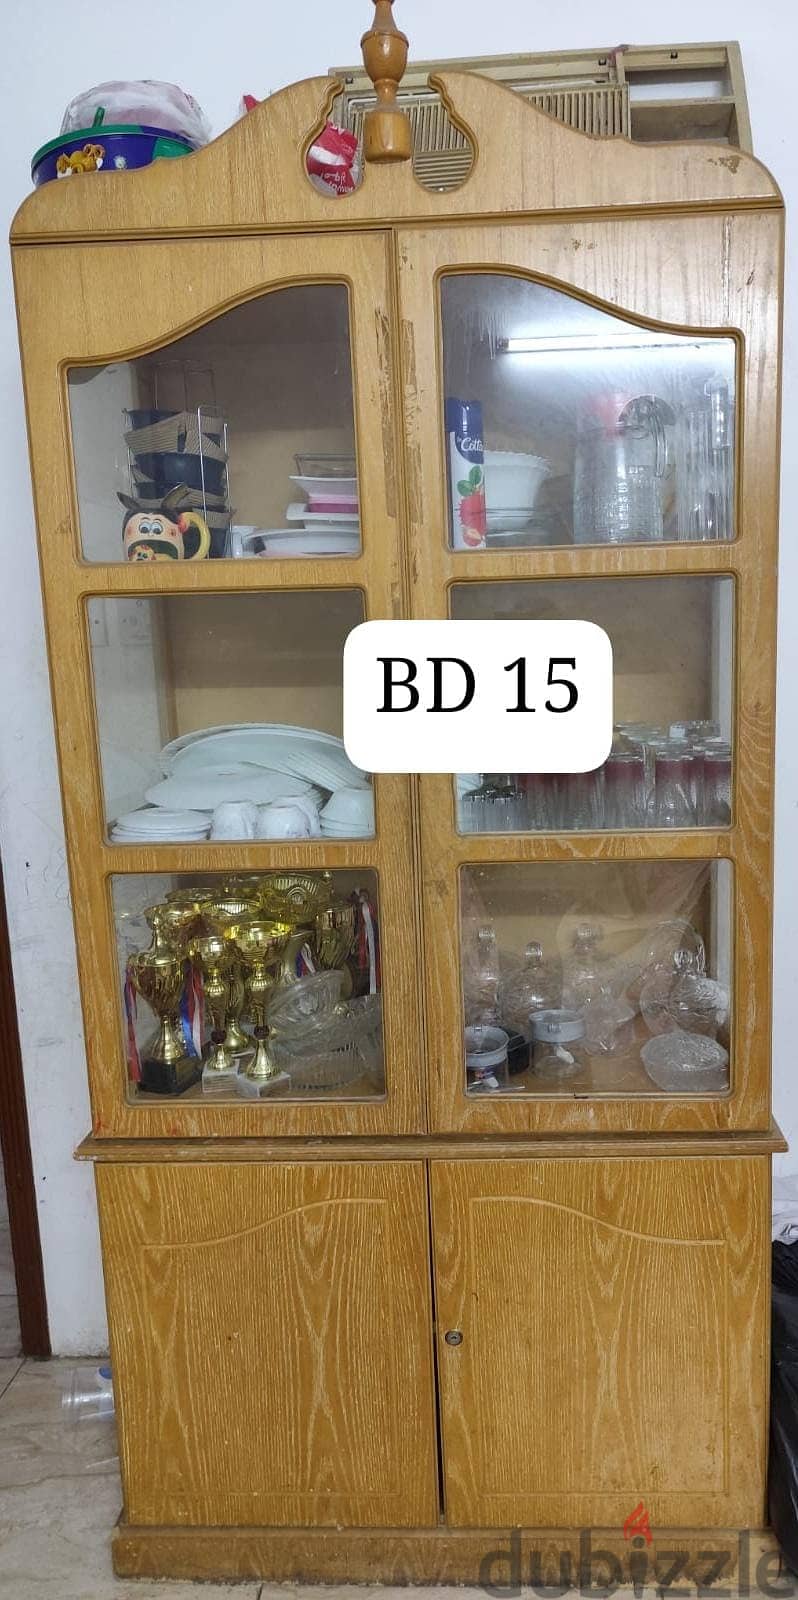 House Hold Items For Immediate Sale as Expat Family Leaving Bahrain 7